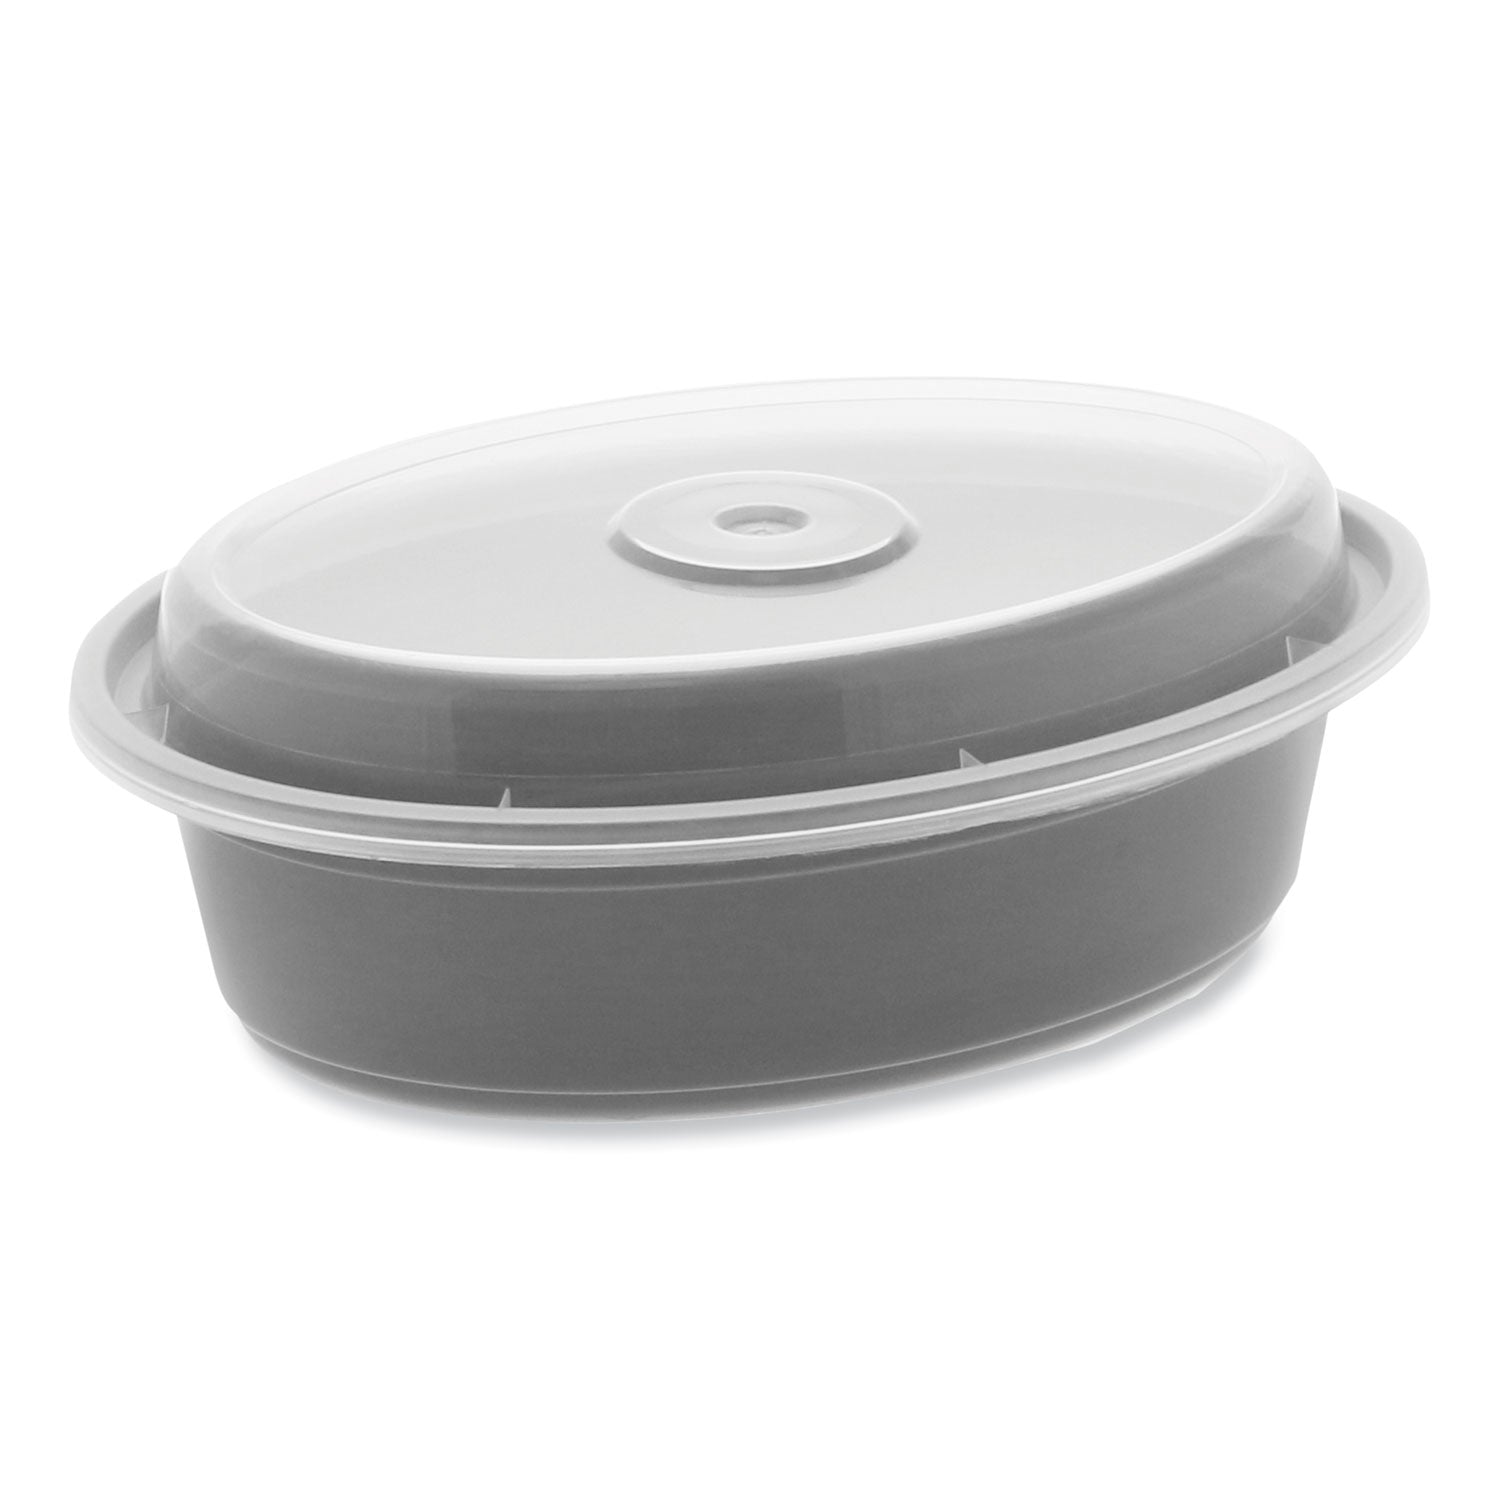 newspring-versatainer-microwavable-containers-oval-16-oz-68-x-48-x-19-black-clear-plastic-150-carton_pctoc16b - 1